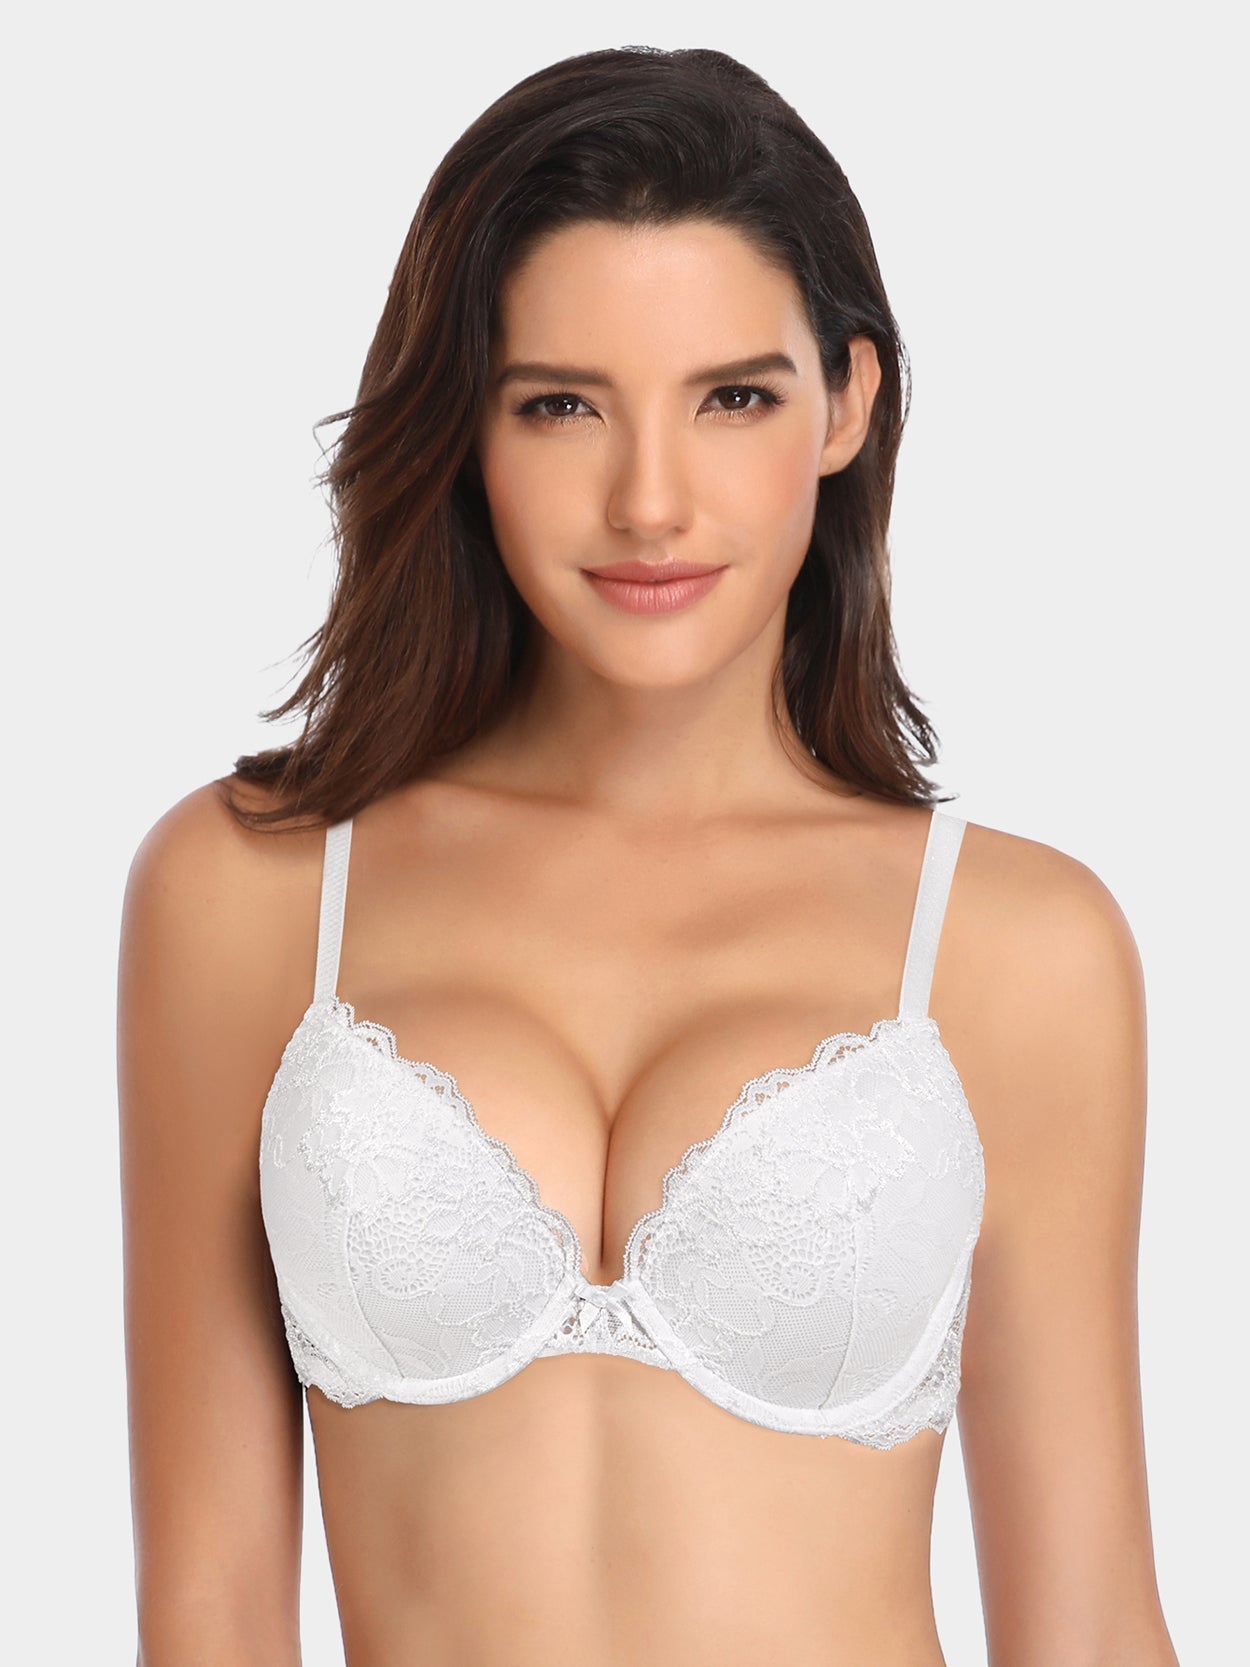 Wholesale demi cup push up bra For Supportive Underwear 